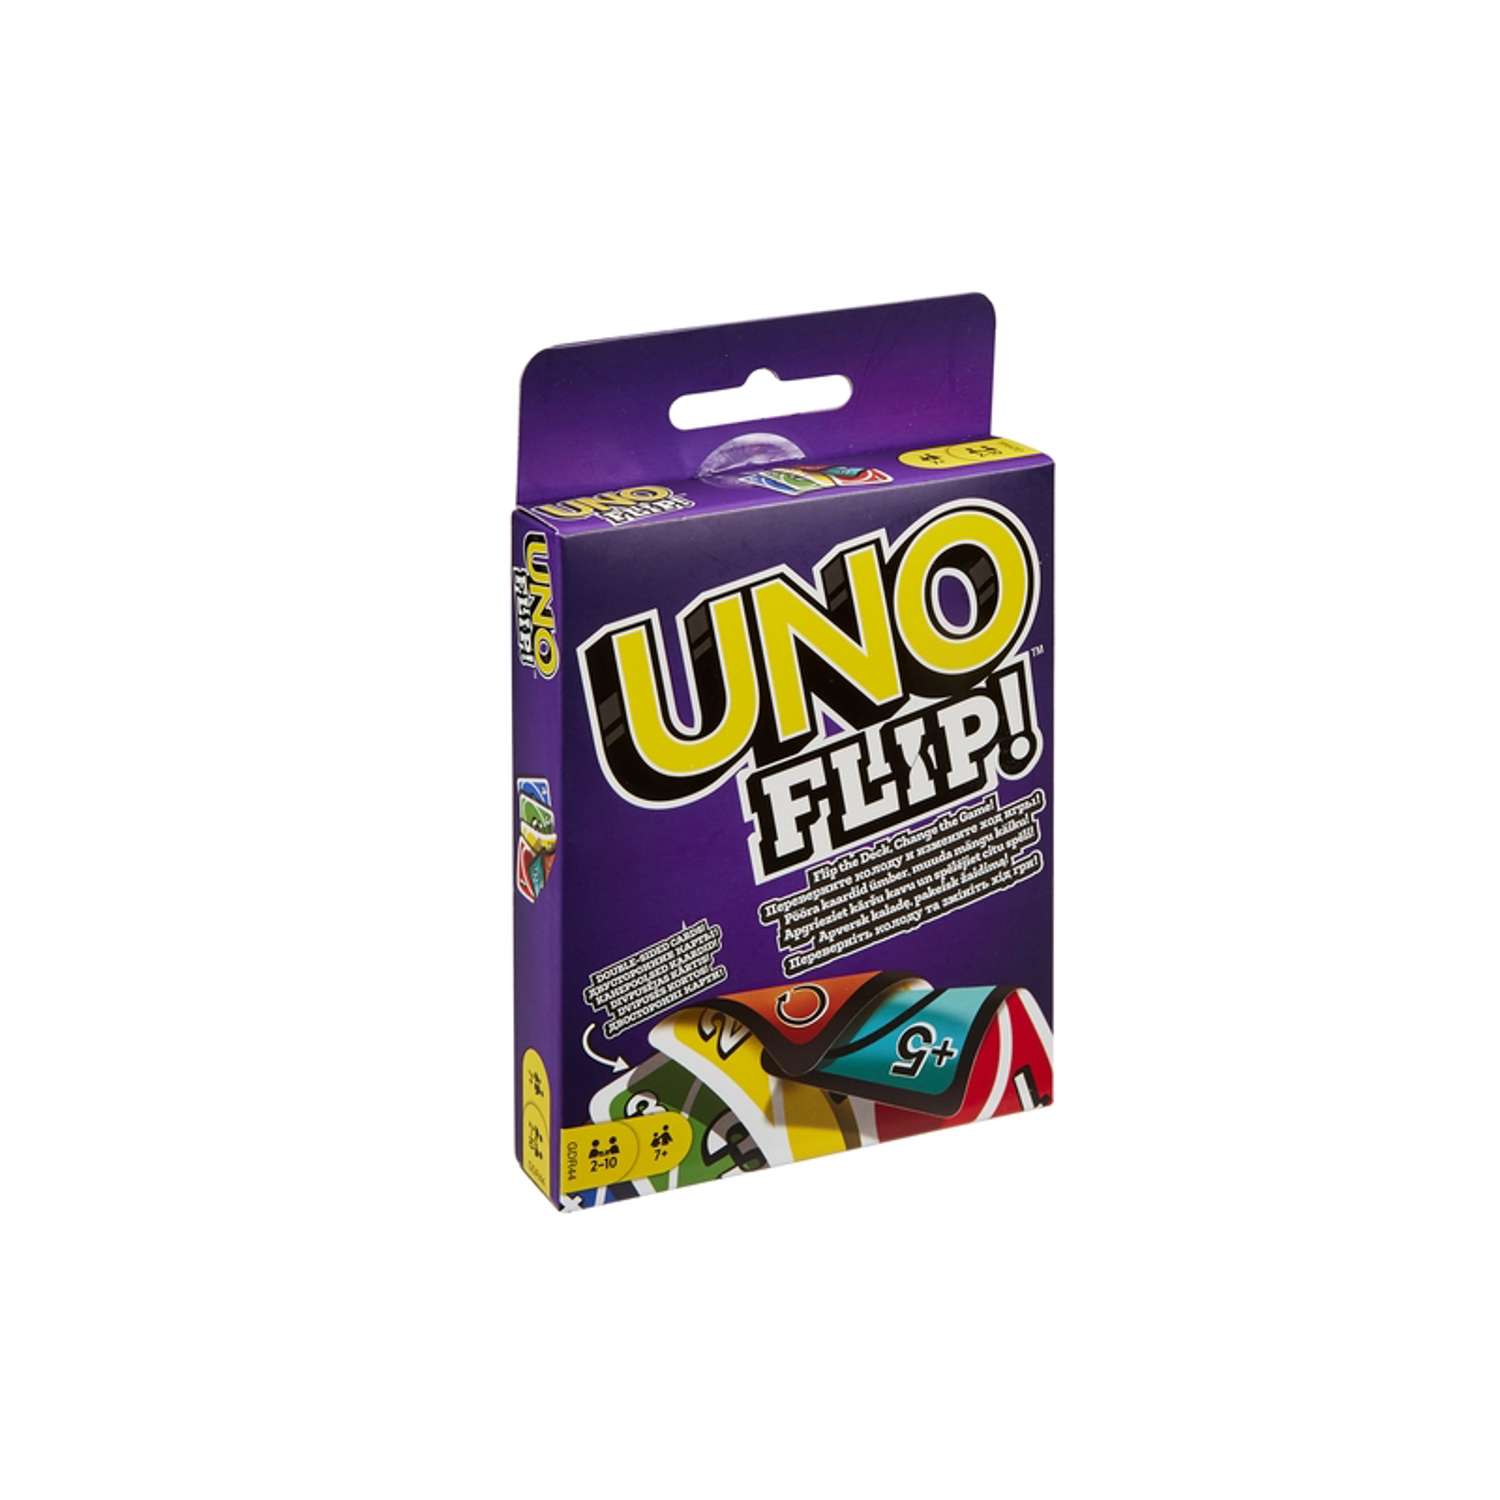 UNO Flip Card Game with Metal Box LIMITED EDITION 